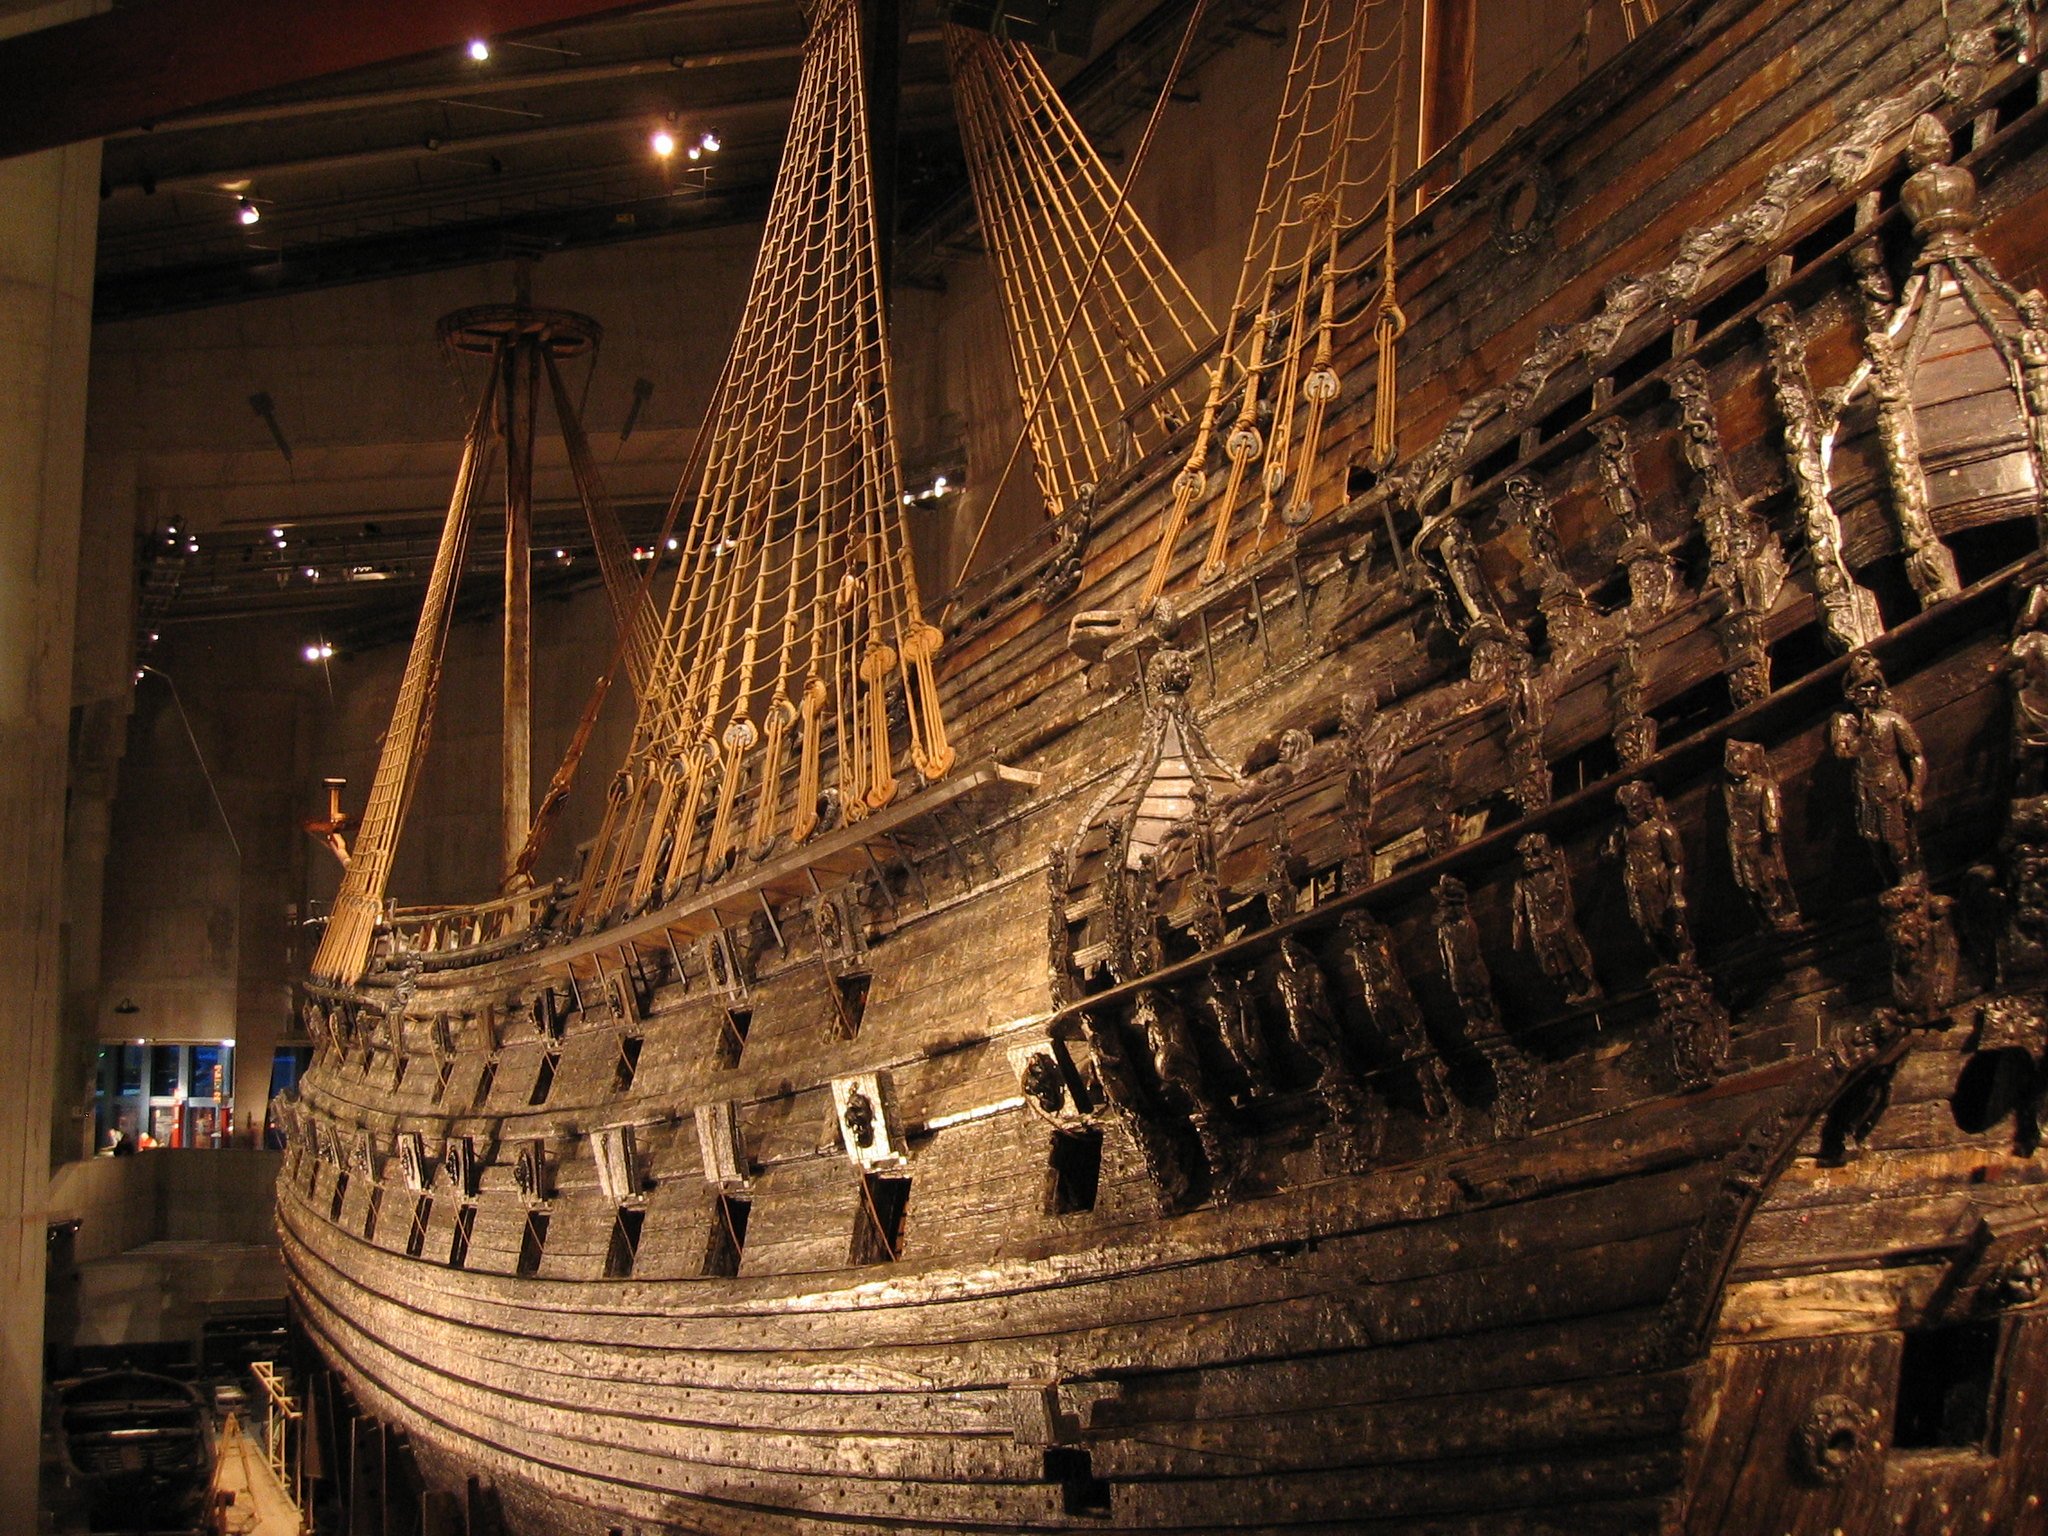 5. Unlocking Nautical Traditions: Understanding the Cultural Significance of Early Boats